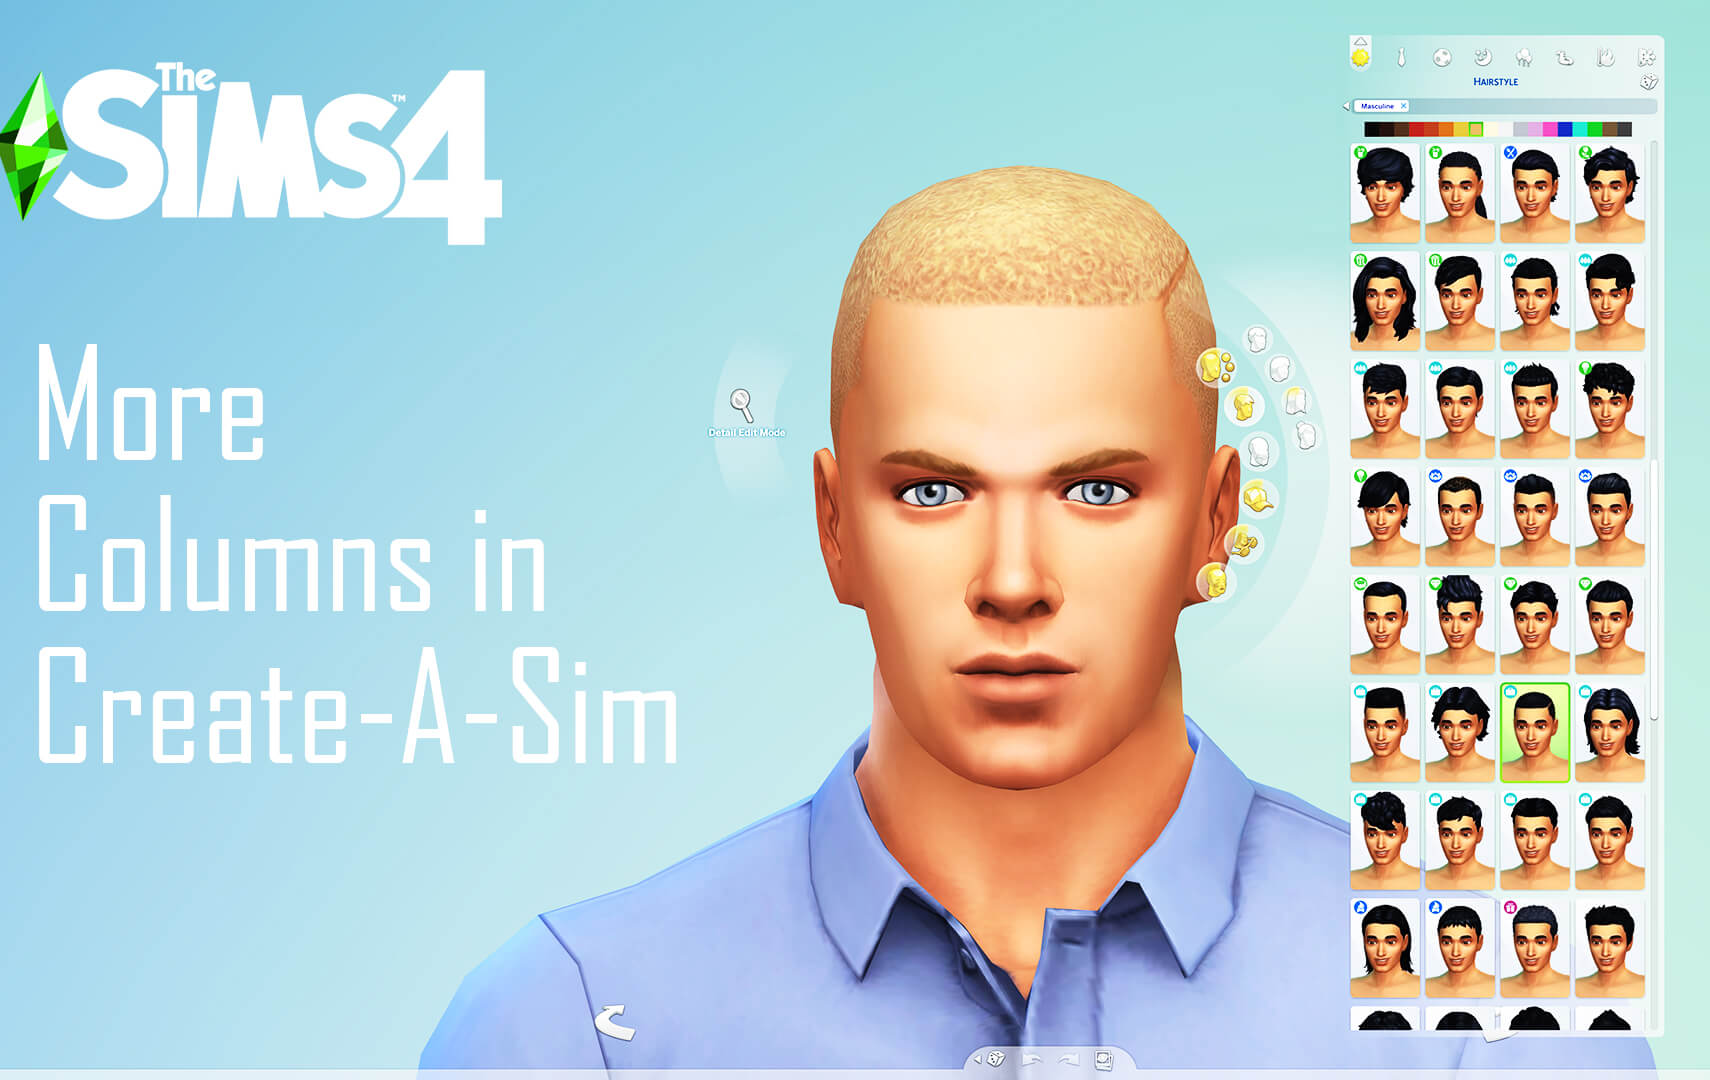 sims 4 custom skin tones dont show up